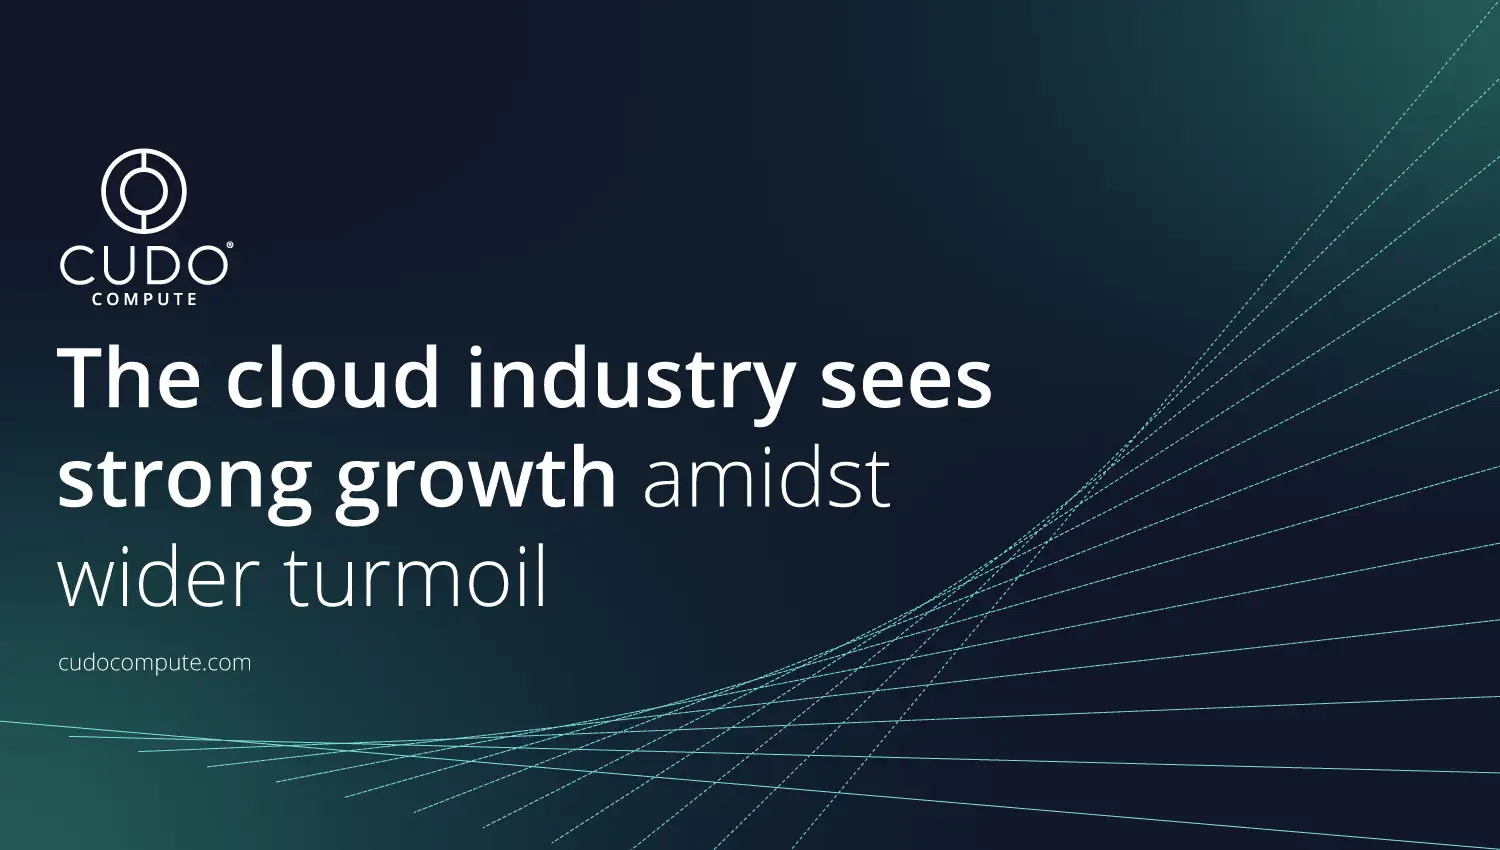 The cloud industry sees strong growth amidst wider turmoil cover photo